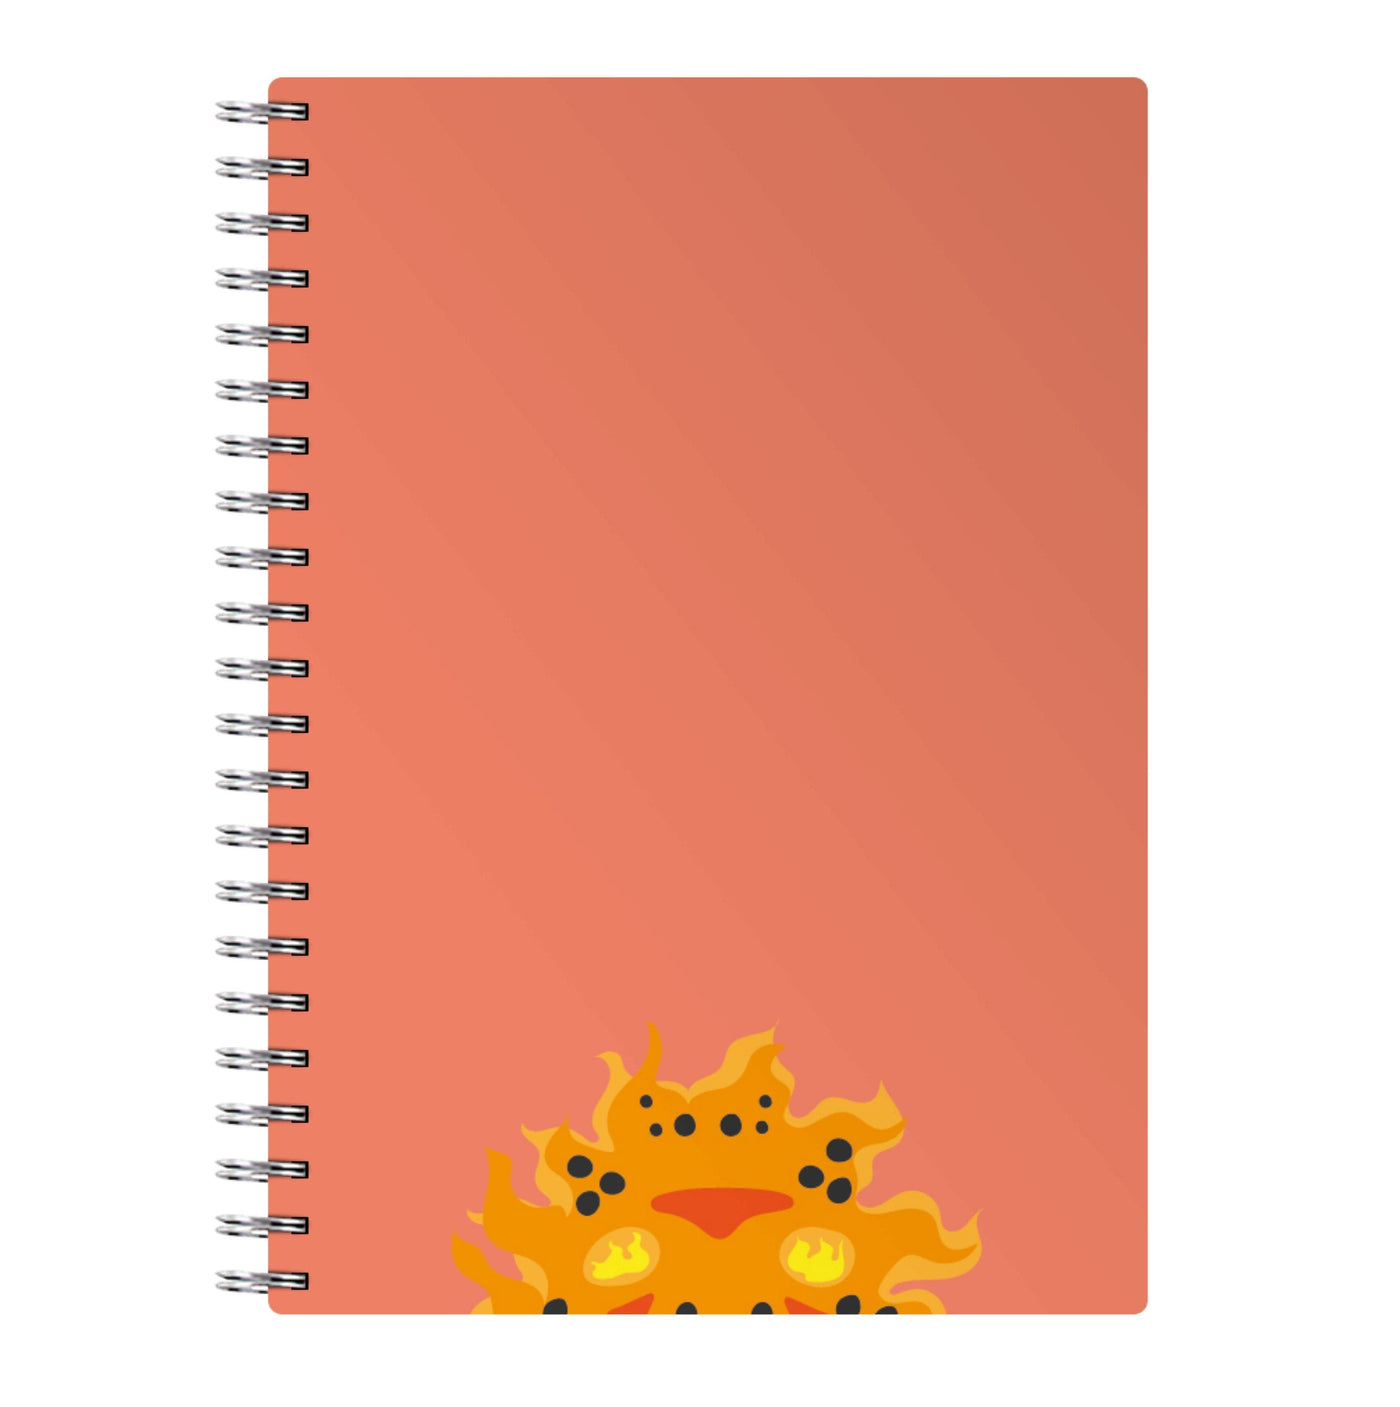 Capfire - Friday The 13th Notebook